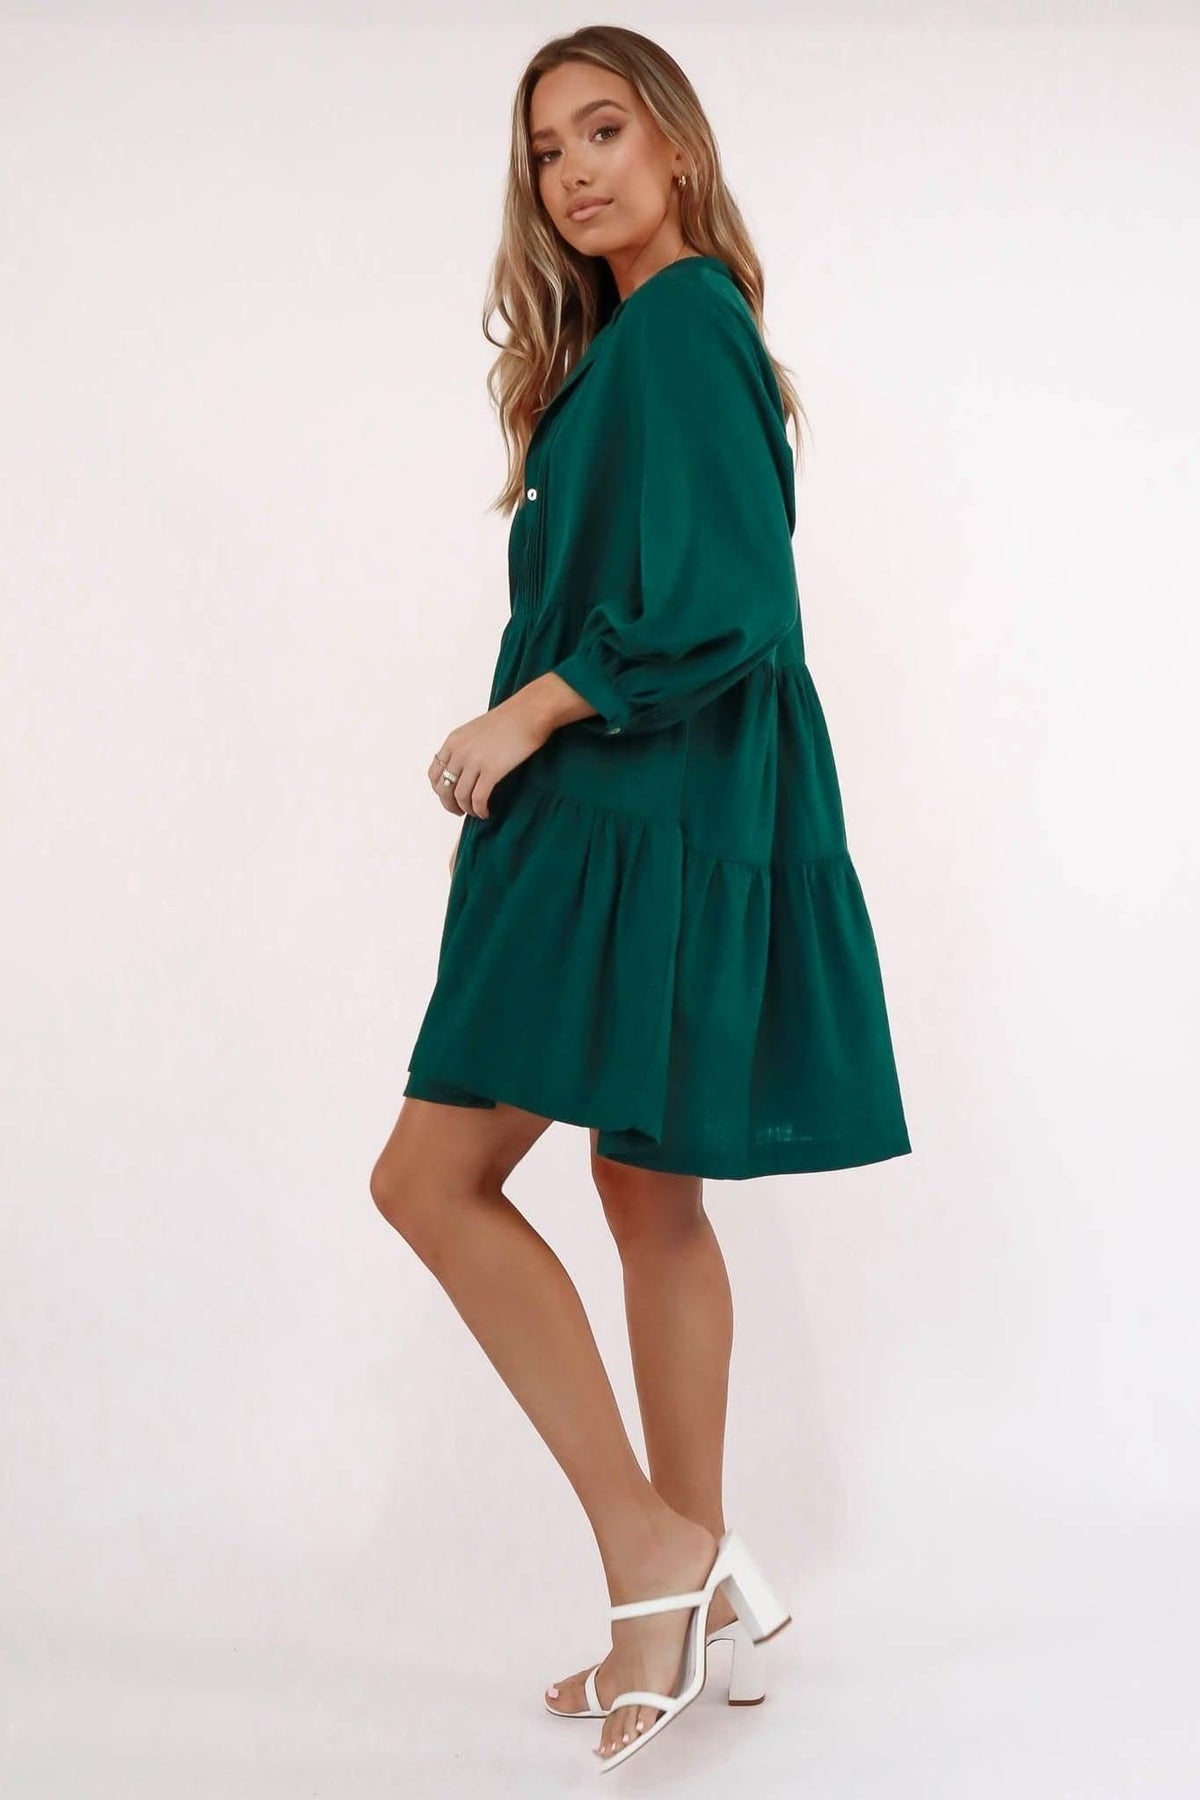 Stanly Dress, BAGGY, BUTTON UP, COTTON, DRESS, DRESSES, GREEN, LINEN, LONG SLEEVE, Stanly Dress only $66.00 @ MISHKAH ONLINE FASHION BOUTIQUE, Shop The Latest Women&#39;s Dresses - Our New Stanly Dress is only $66.00, @ MISHKAH ONLINE FASHION BOUTIQUE-MISHKAH